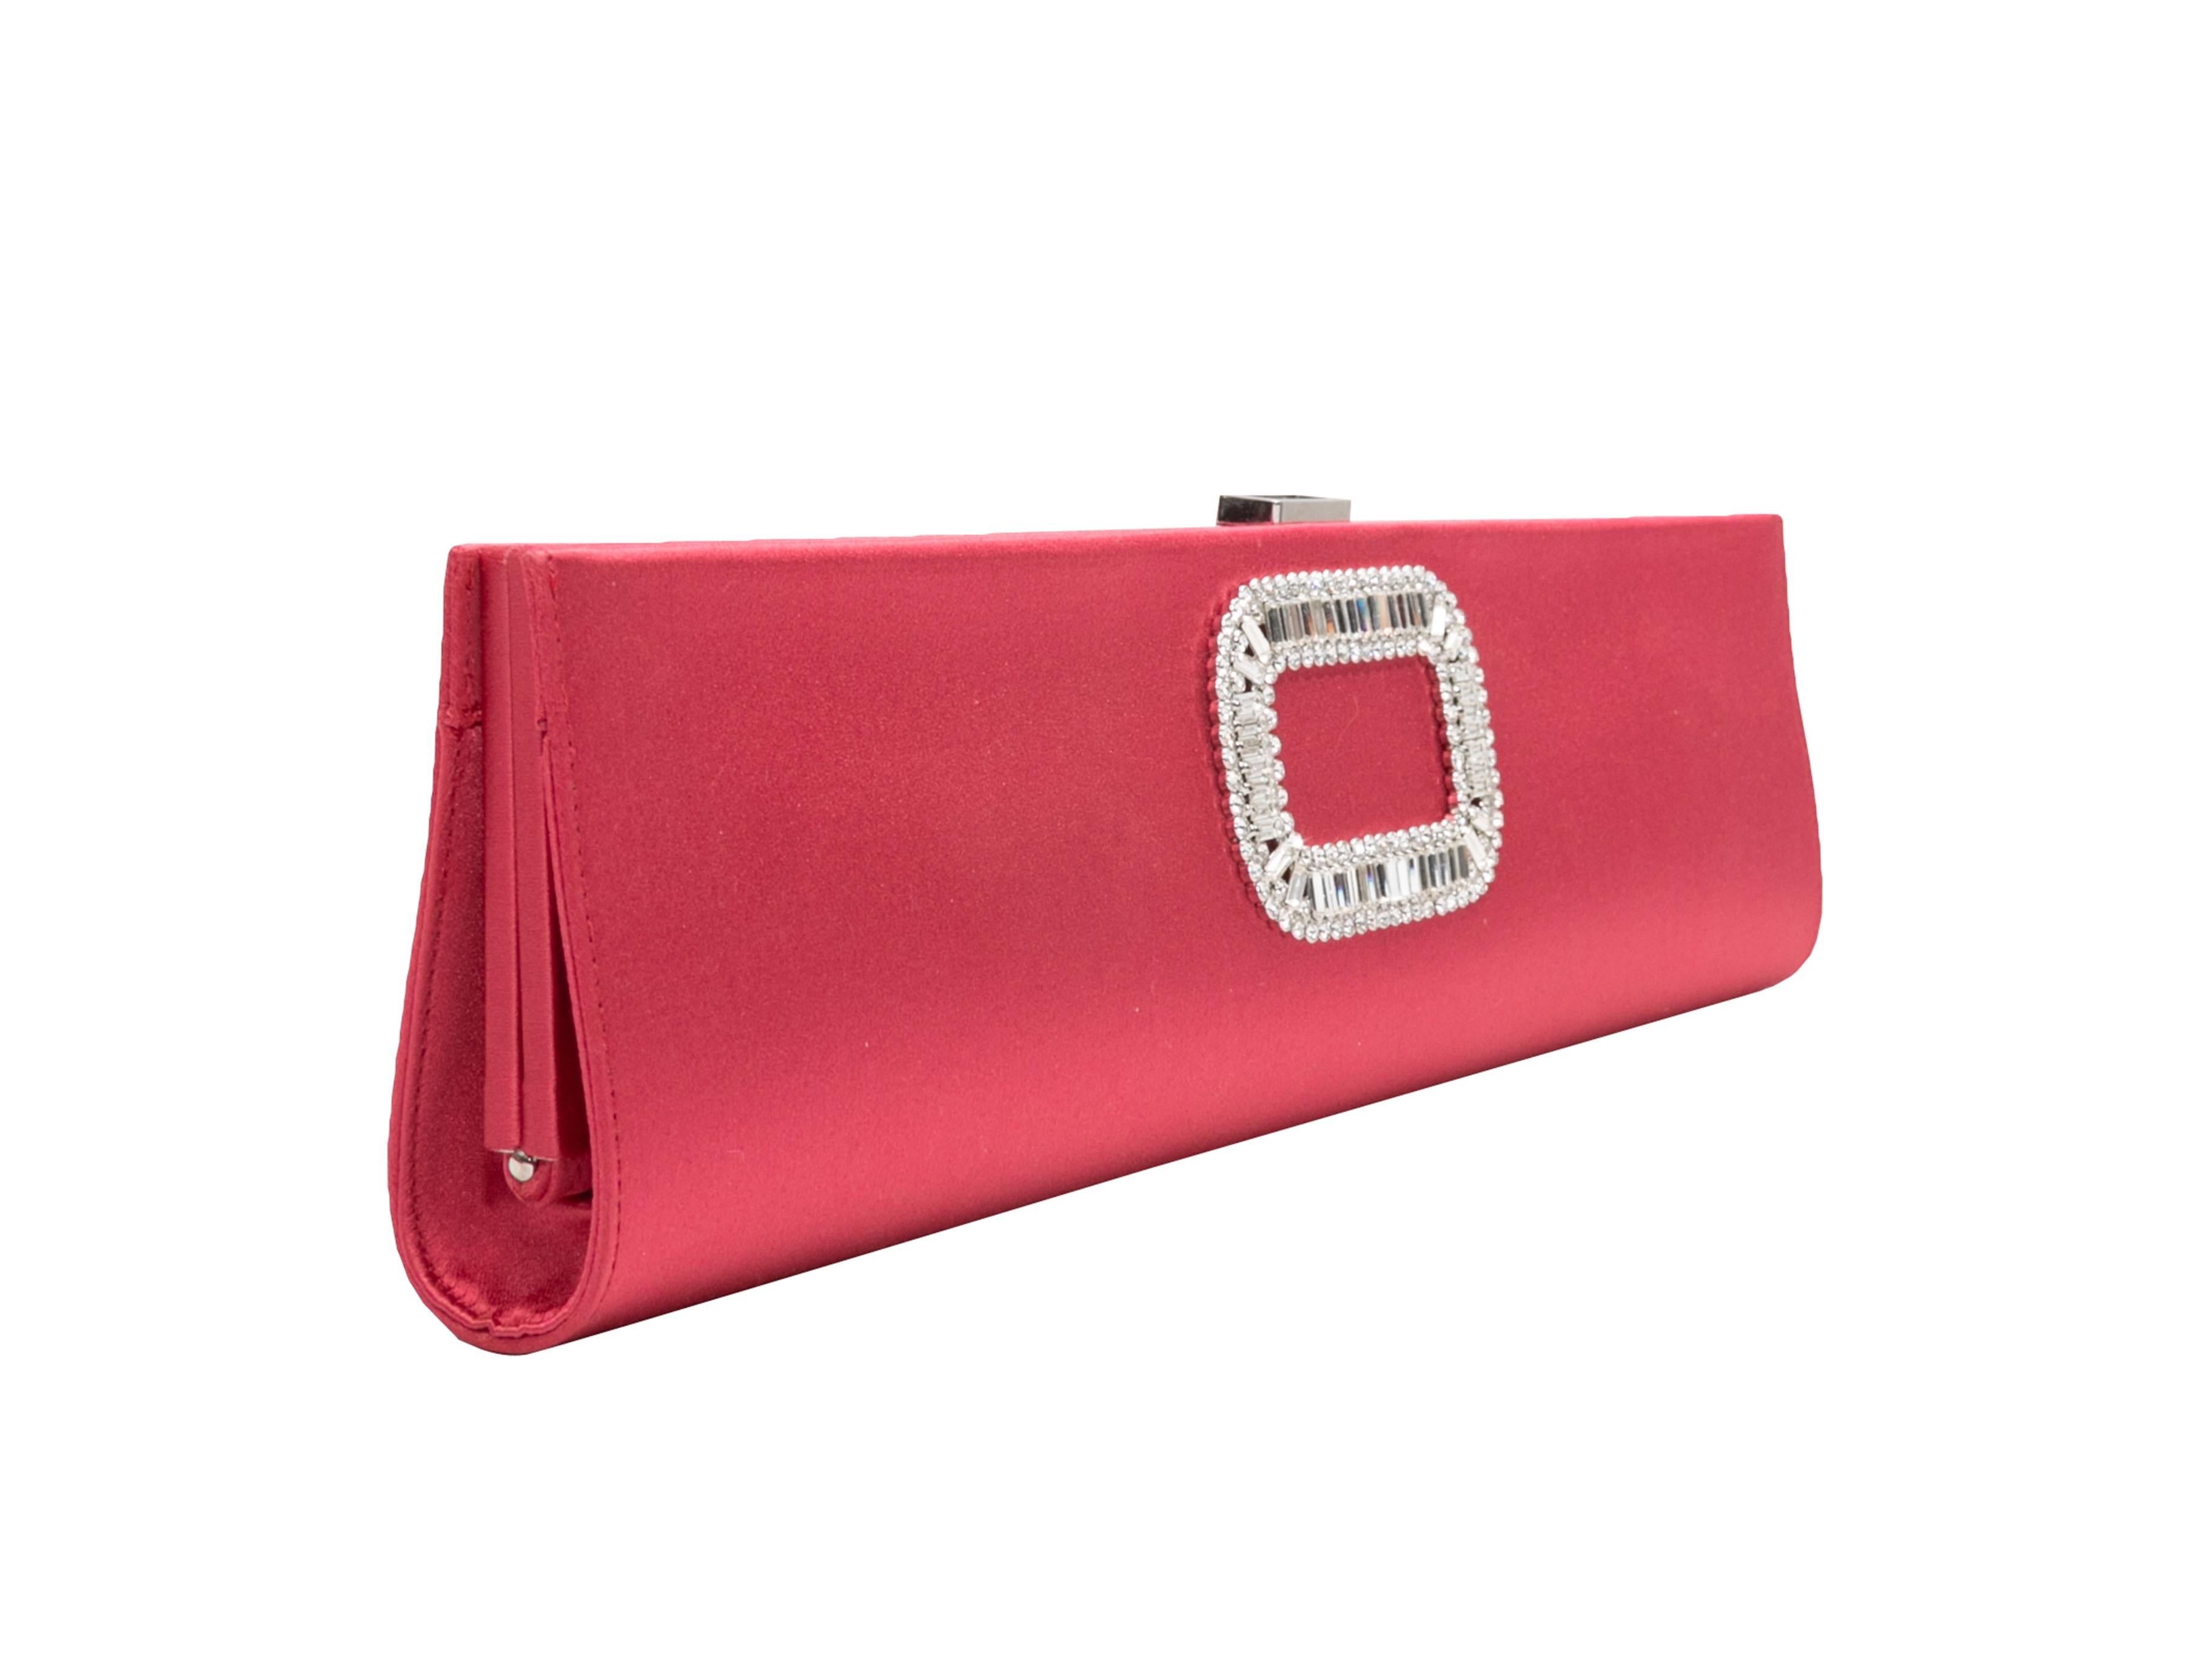 Pink Roger Vivier Satin Crystal-Embellished Clutch. This clutch features a satin body, silver-tone hardware, a Strass crystal-embellished buckle adornment at front, and a top clasp closure. 13